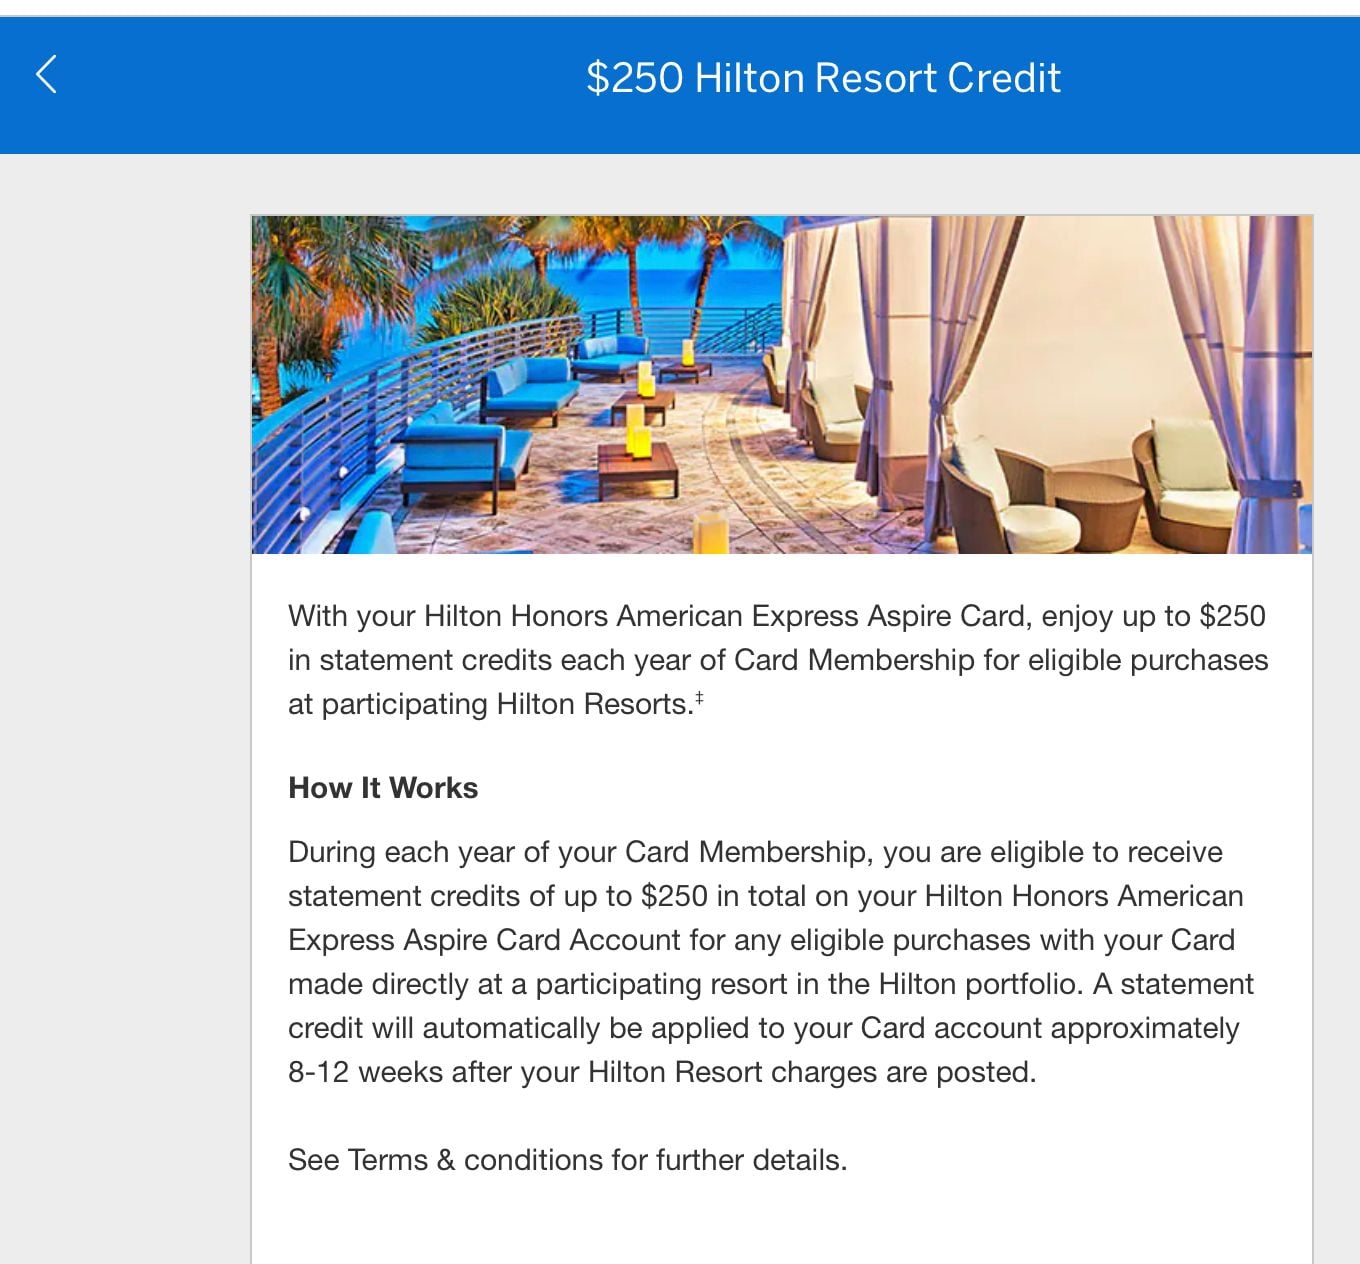 How To Use Hilton Resort Credit